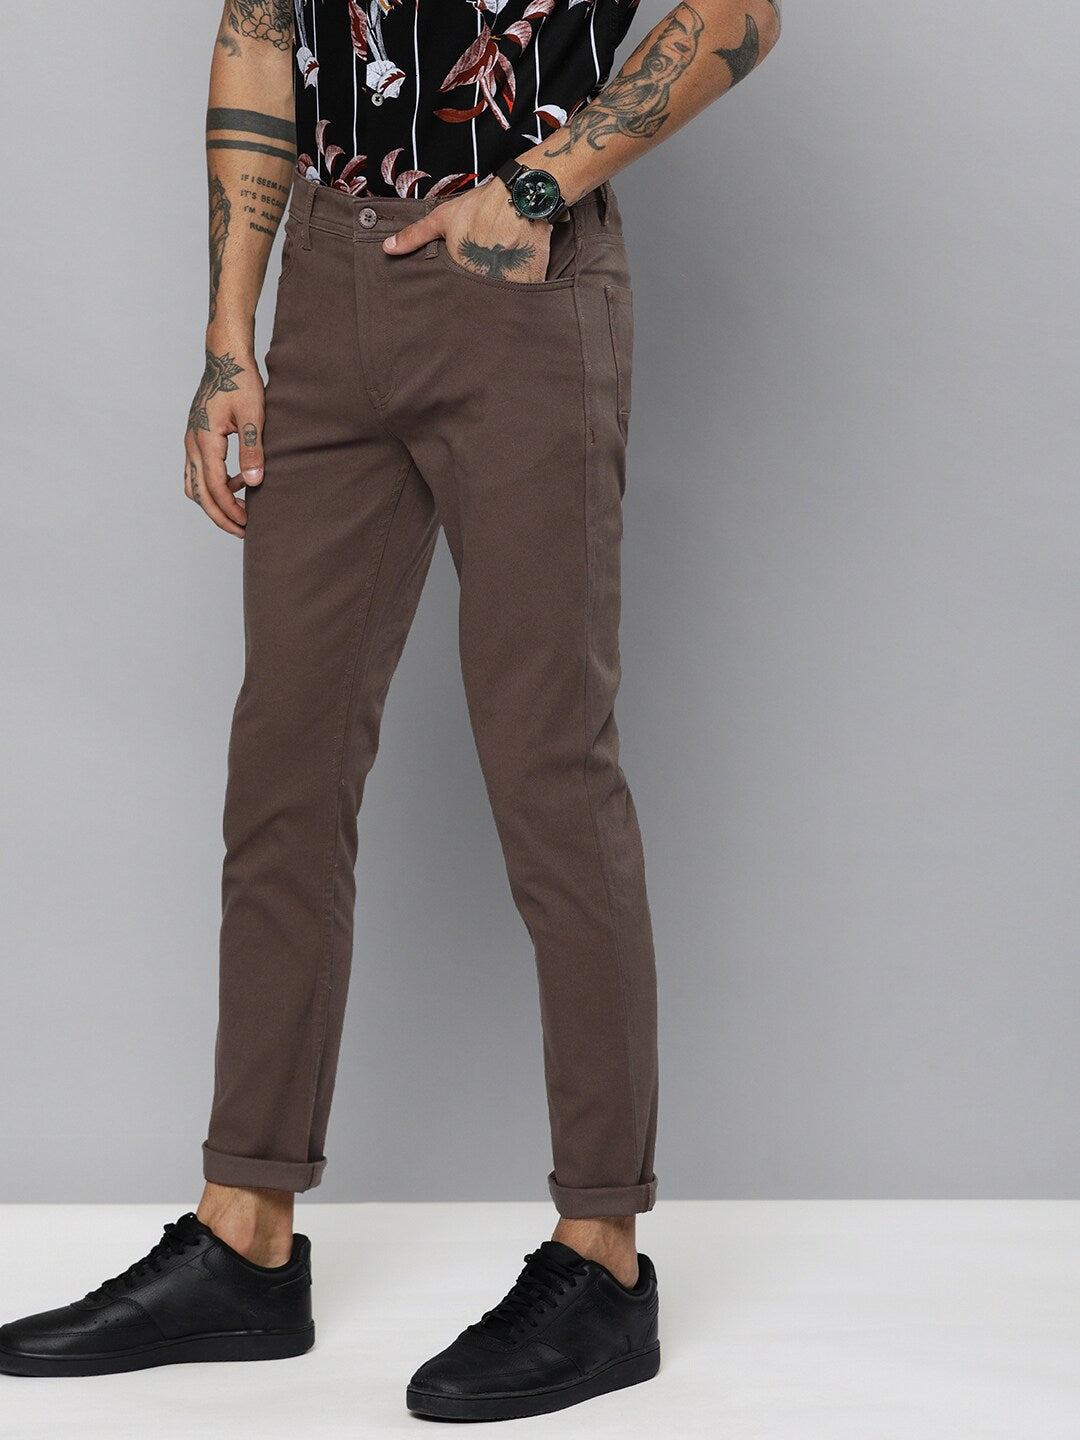 Buy Sky Blue Trousers  Pants for Men by The Indian Garage Co Online   Ajiocom